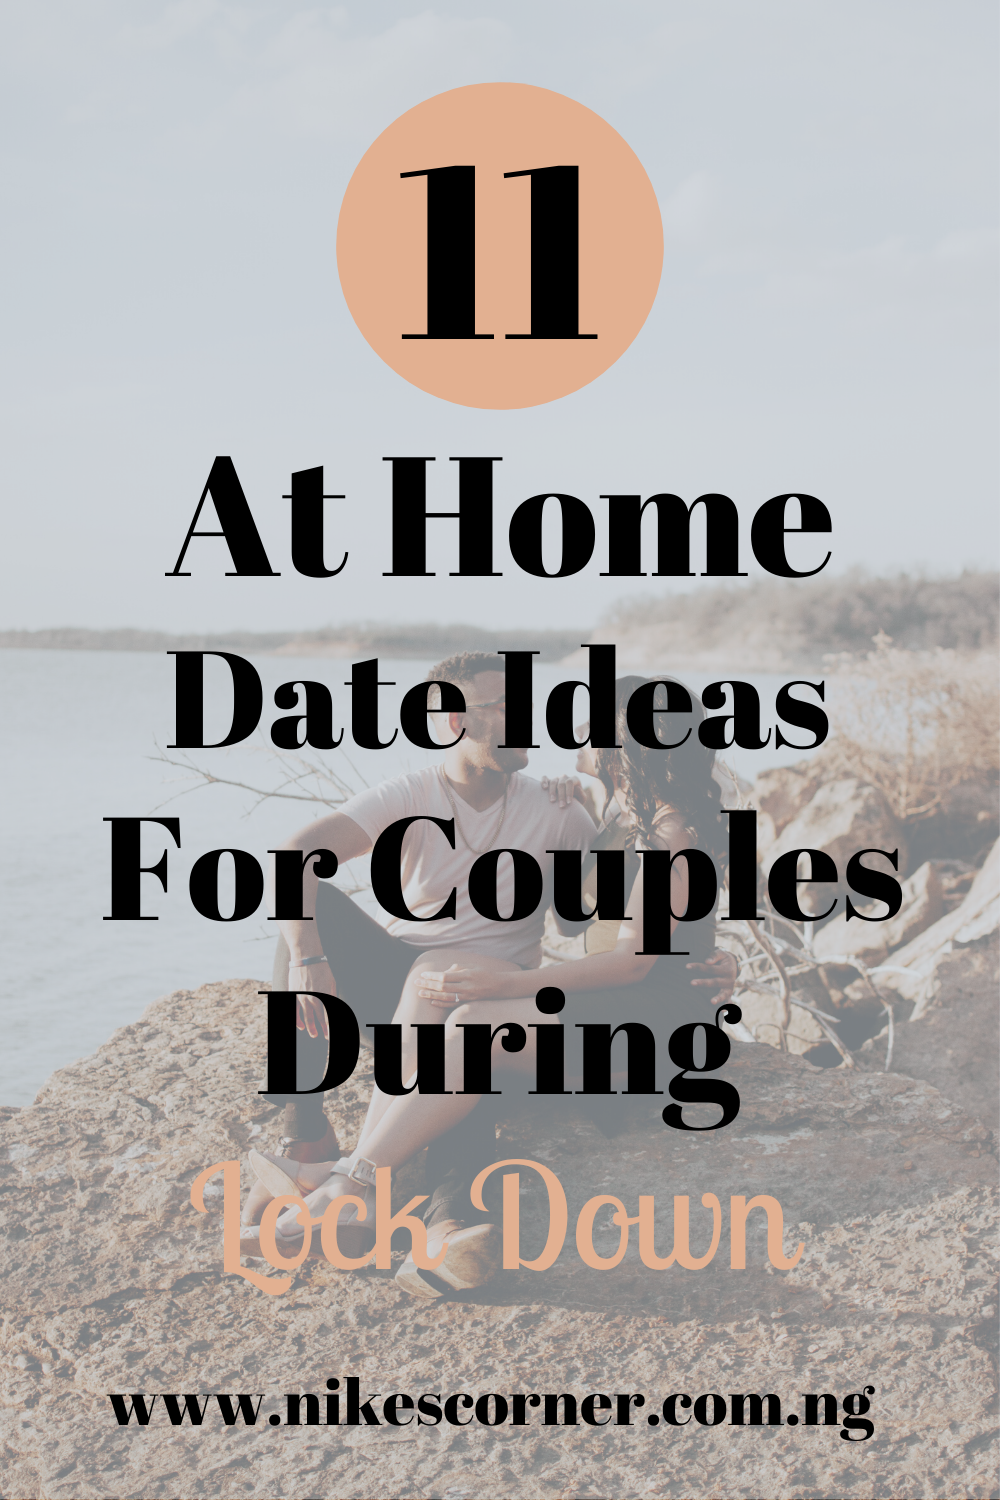 At Home Date Ideas For Couples During Lock Down | Nike's Corner